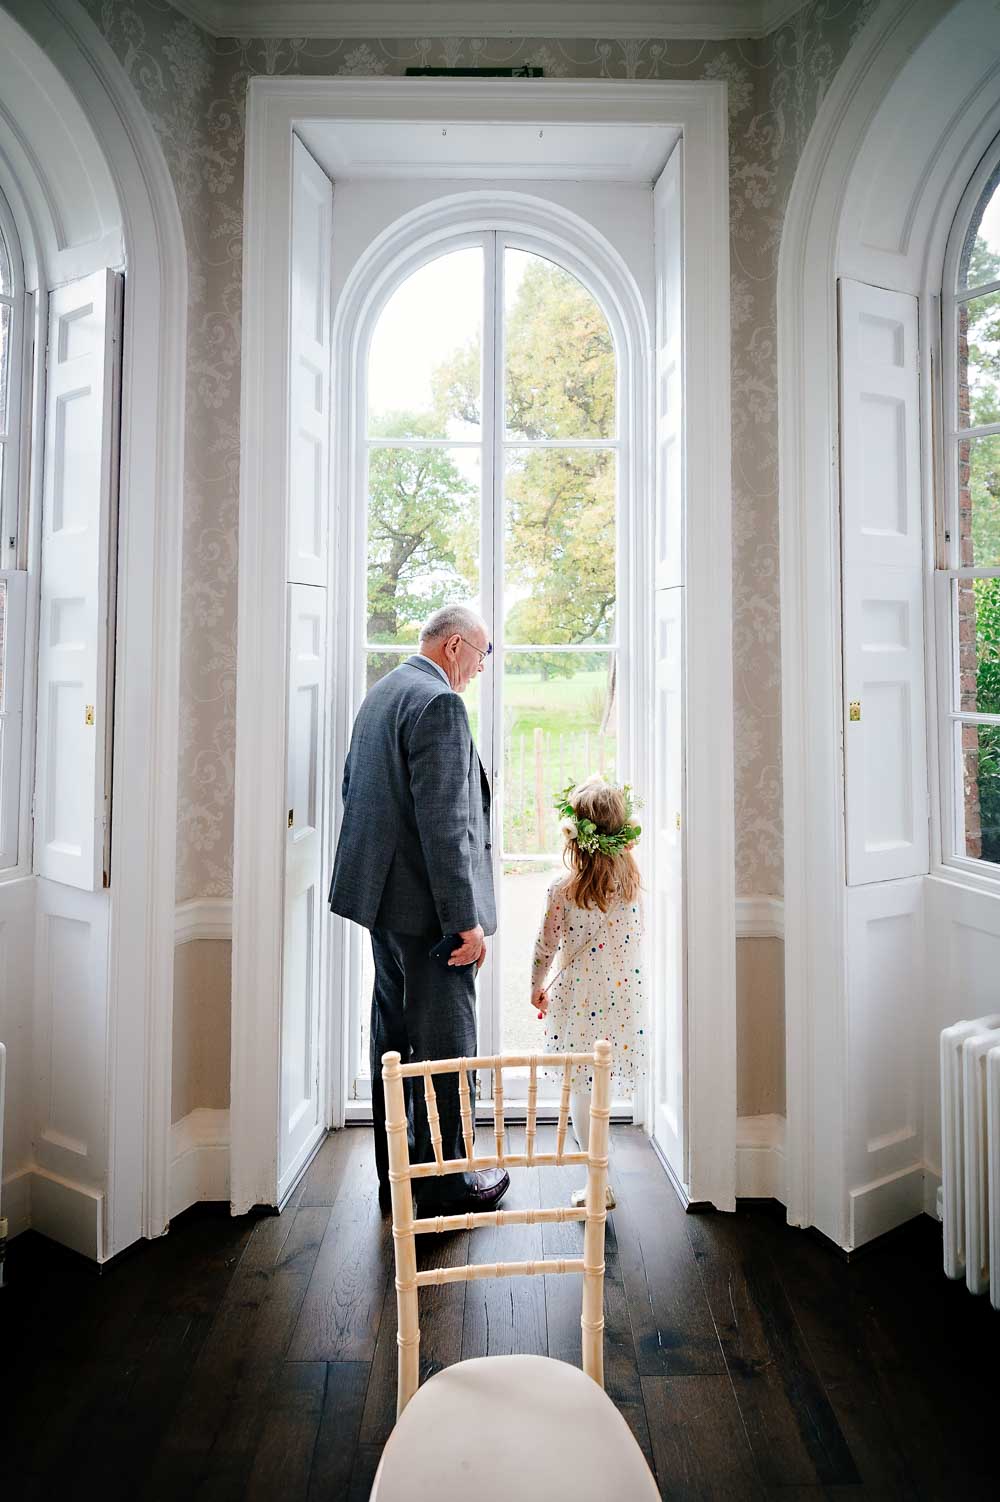 Little girl with her grandfather standing in bay windows of Morden Park house, London